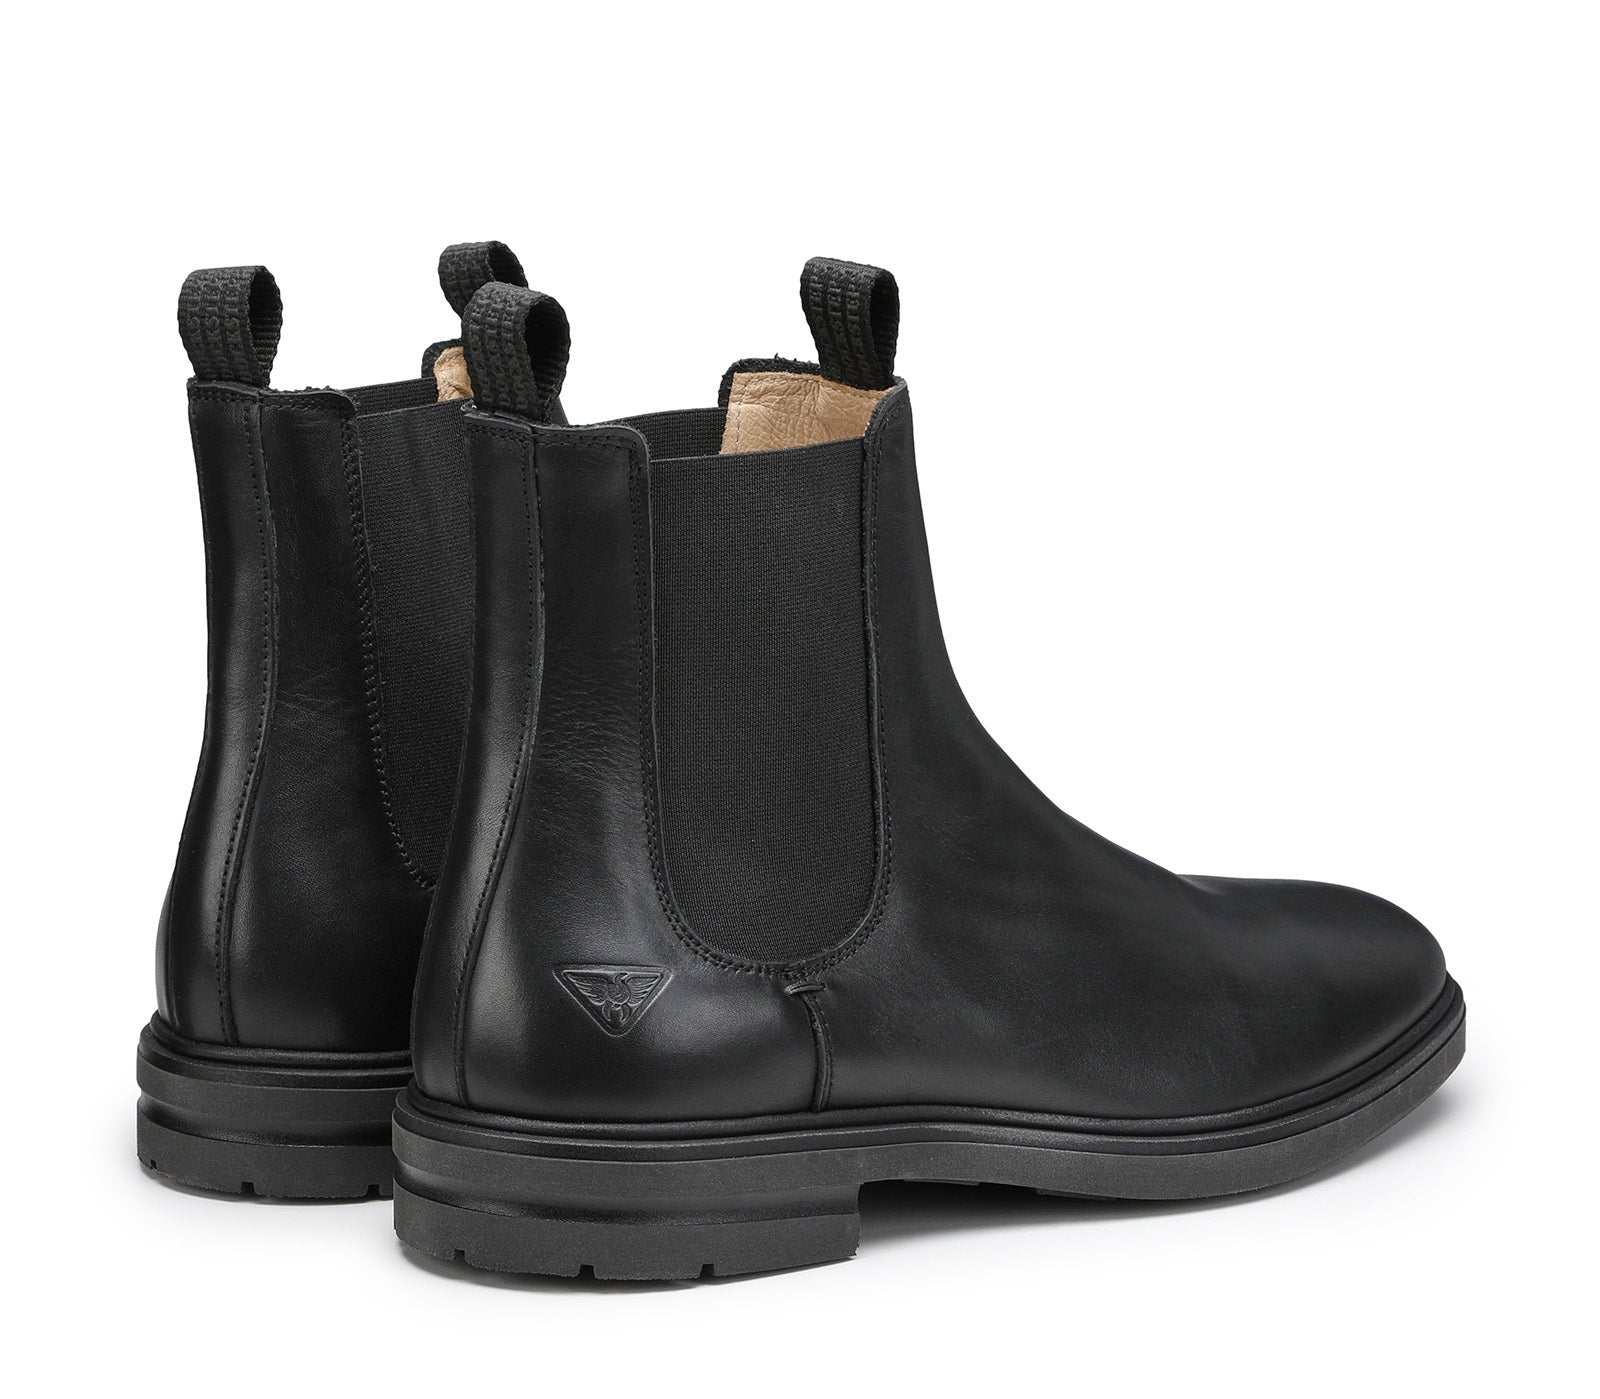 Men's Glossy Leather Chelsea Boots with Elasticized Inserts